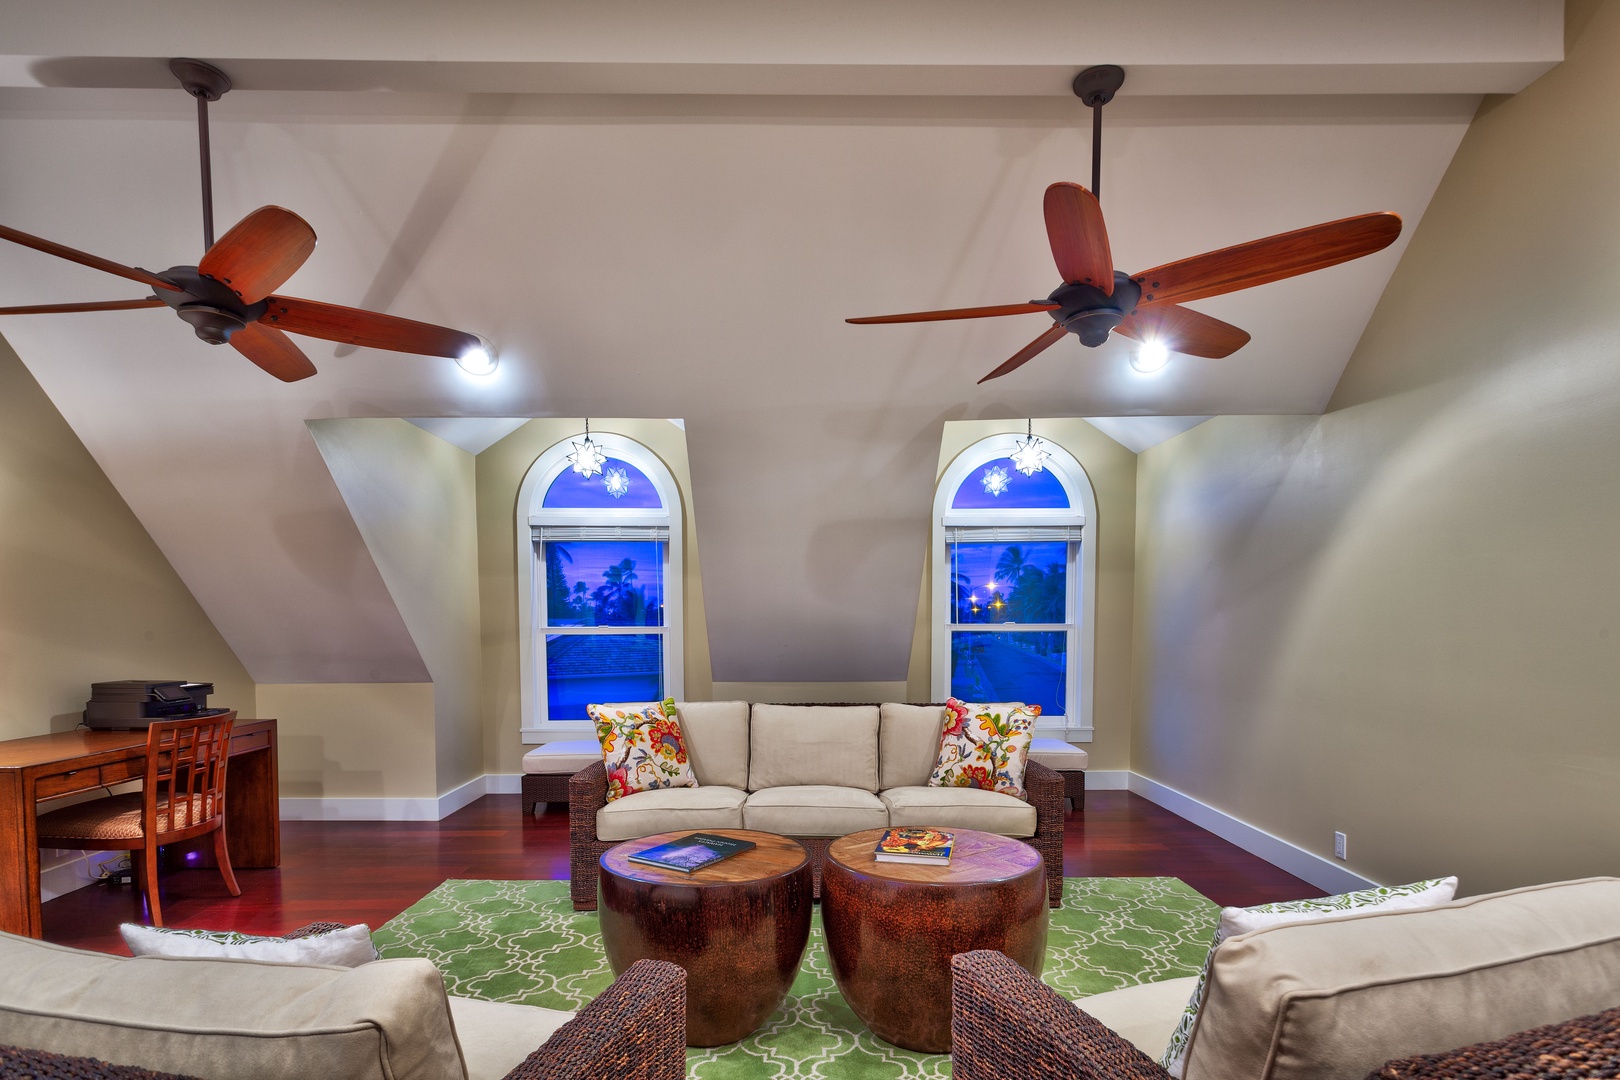 Kailua Vacation Rentals, Maluhia - Enjoy your privacy in the primary bedroom seating area, with a desk and air conditioning